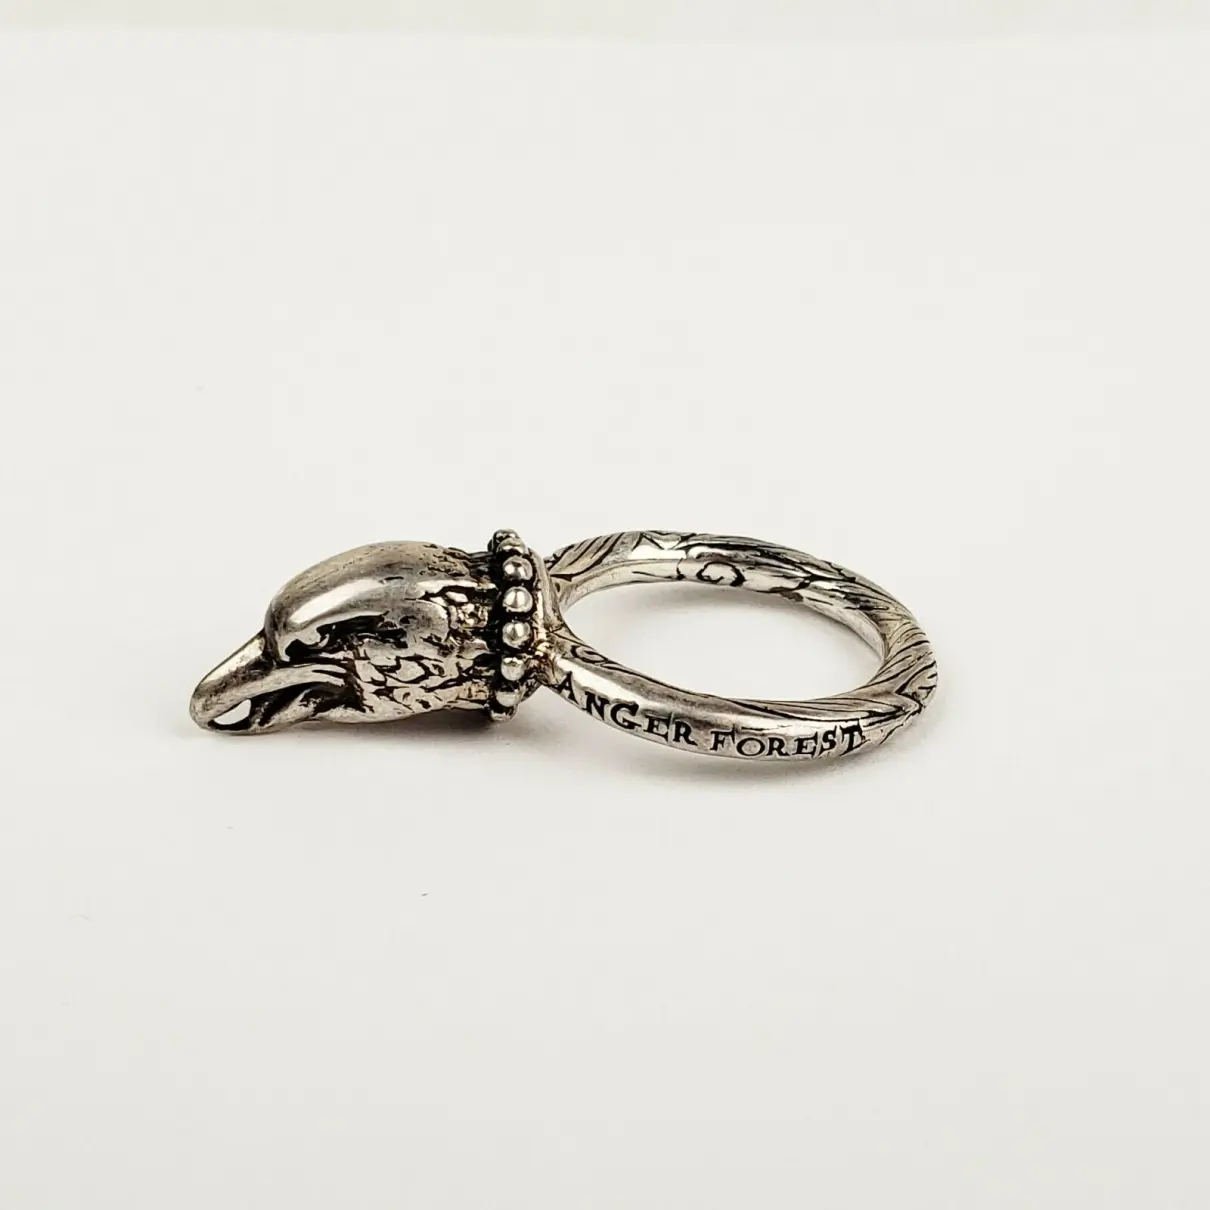 Buy Gucci Silver ring online